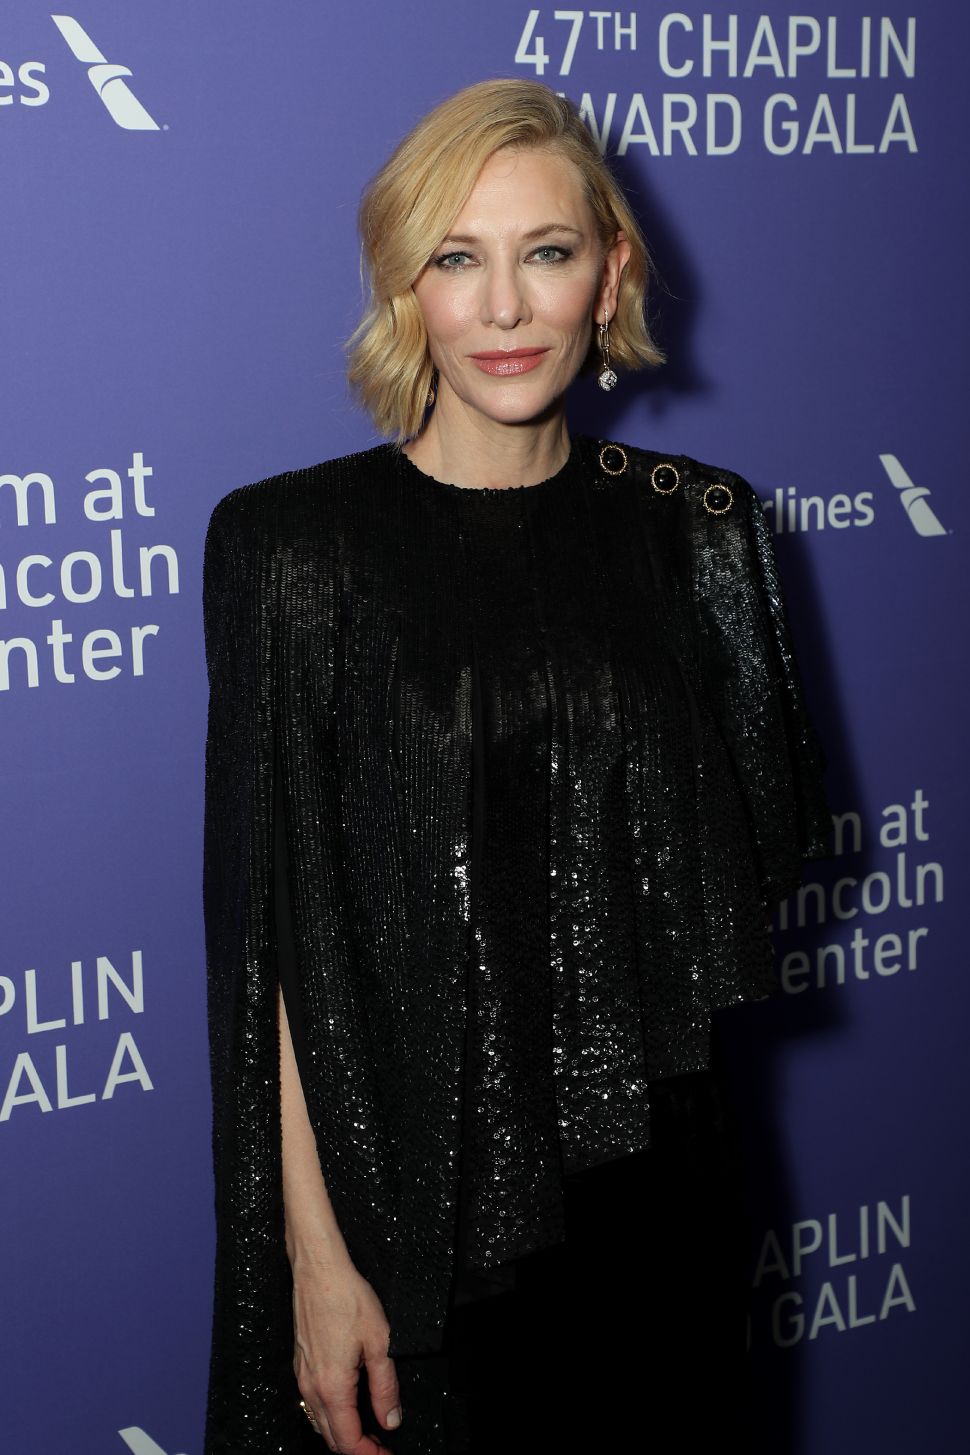 Covid Interrupts But Cannot Stop Film at Lincoln Center From Honoring Cate Blanchett